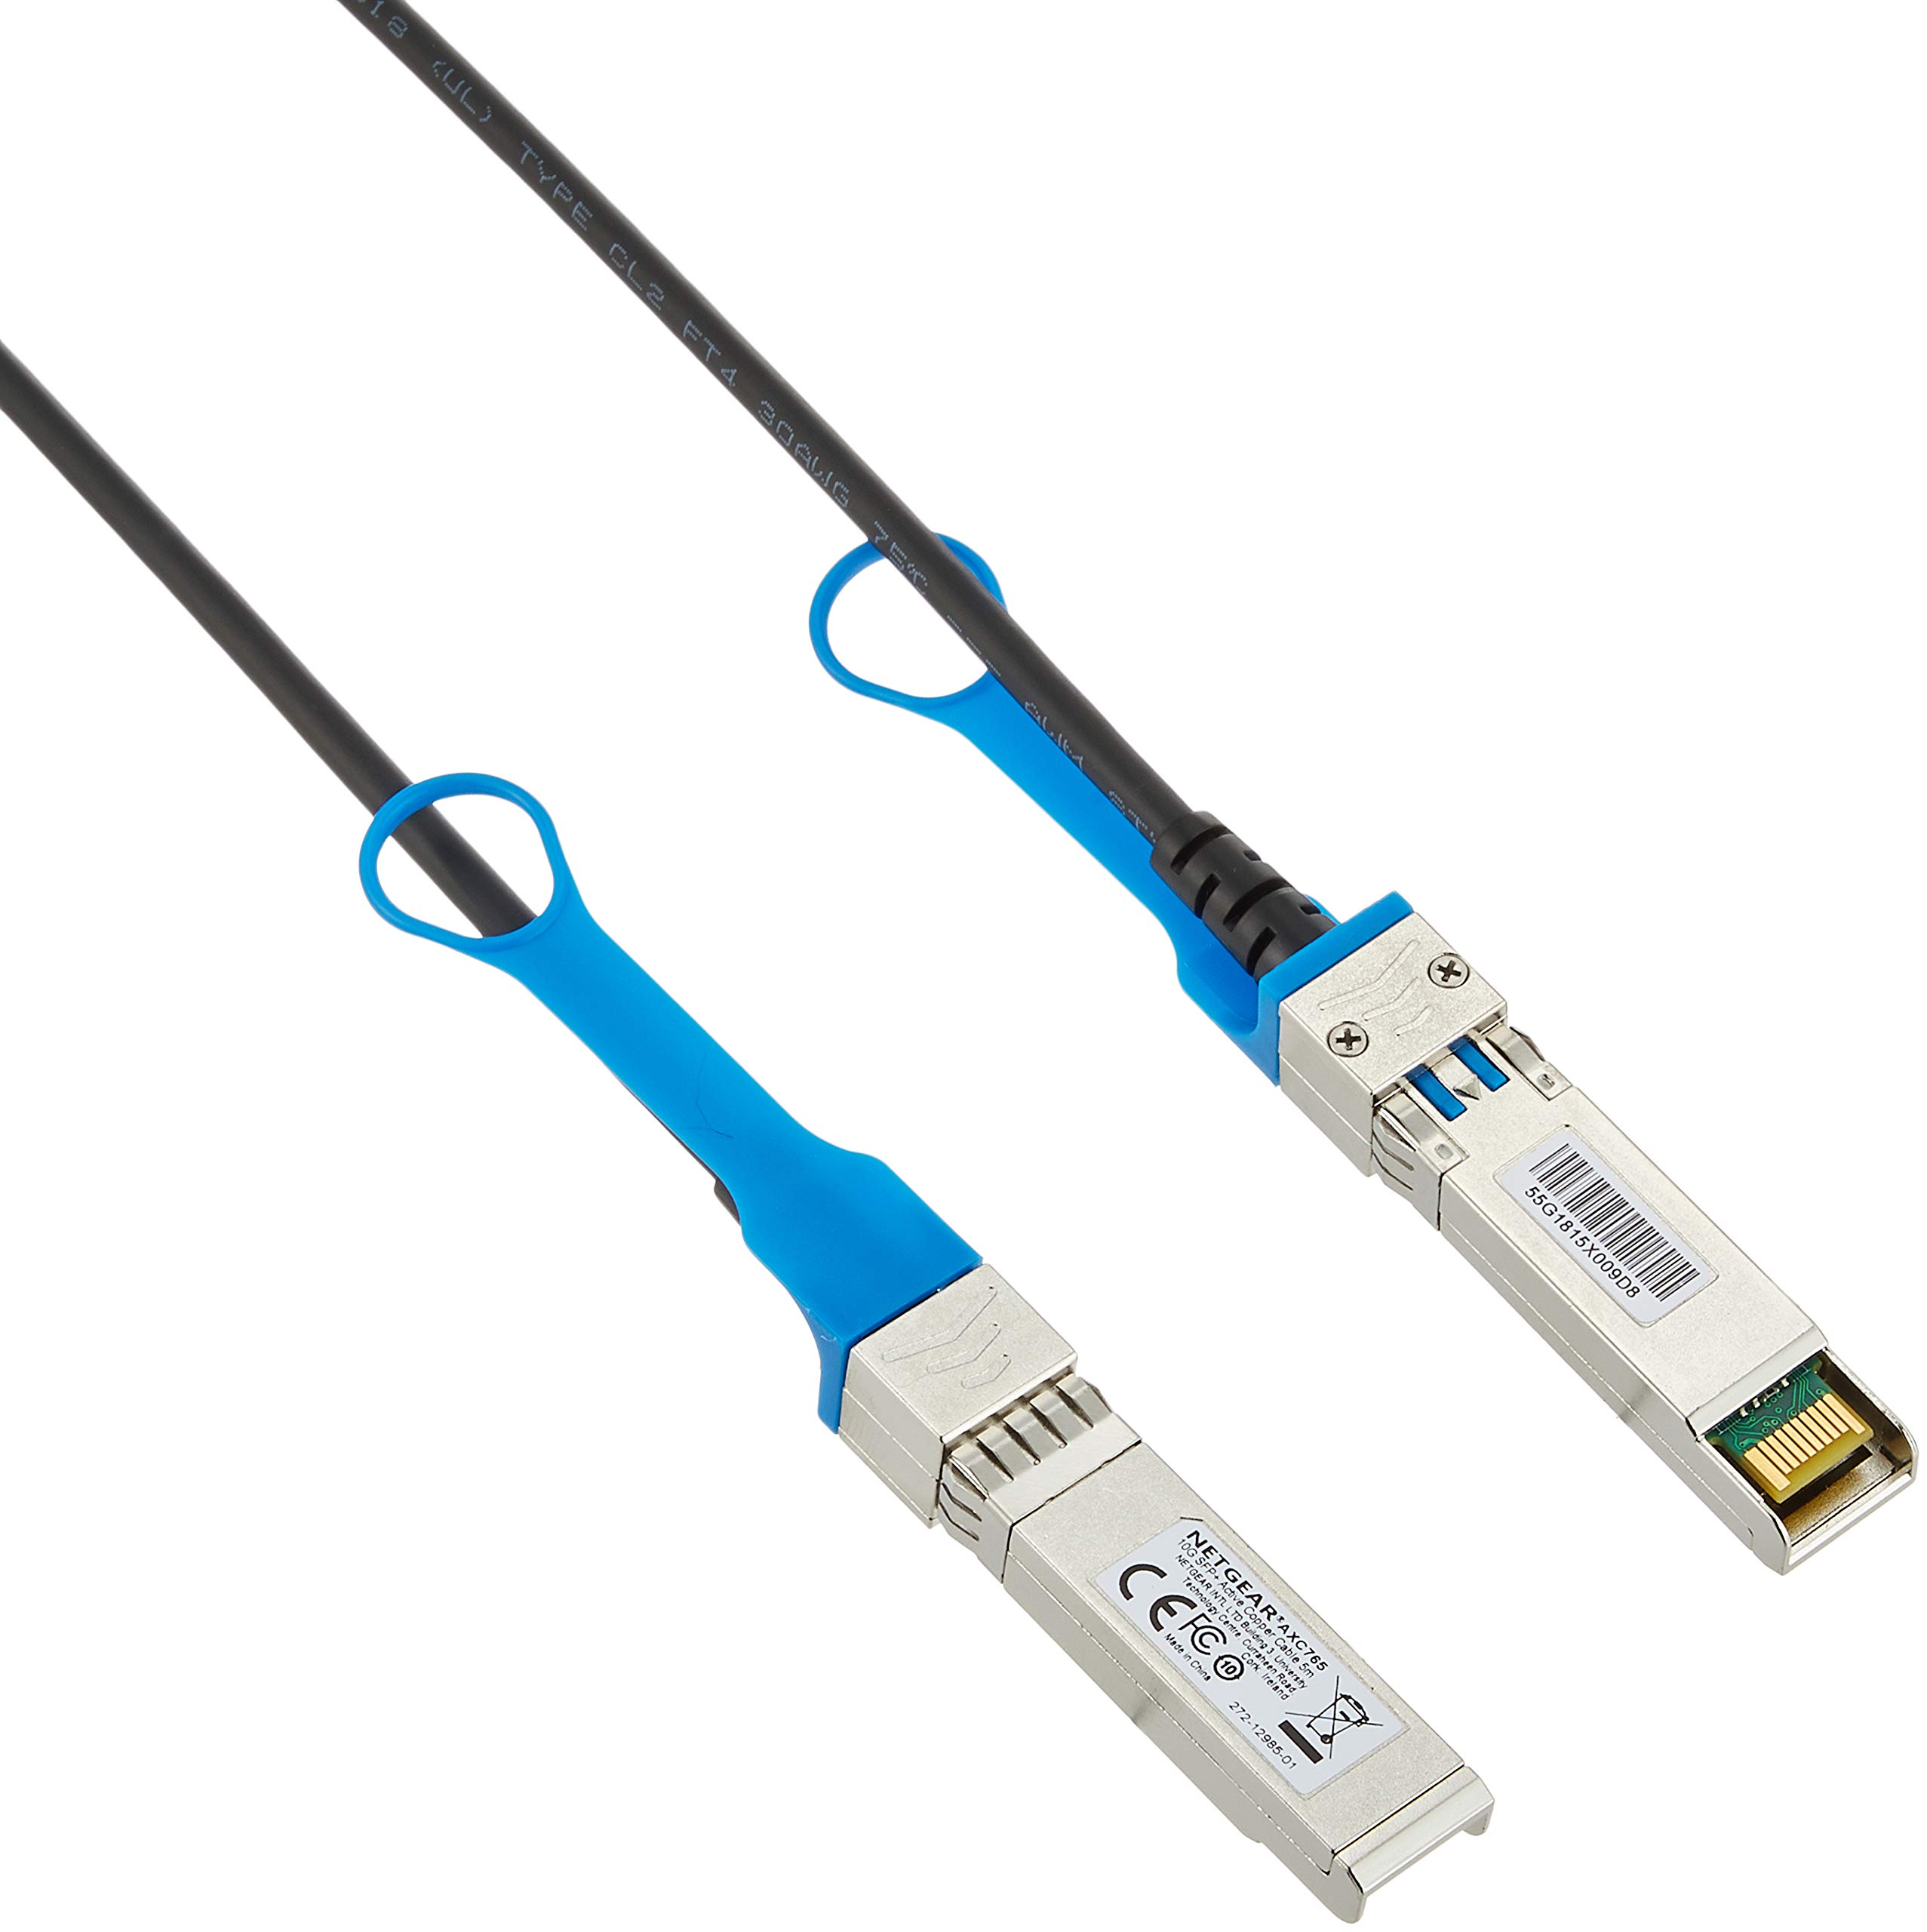 DIRECT ATTACH CABLE 5M (AXC765)